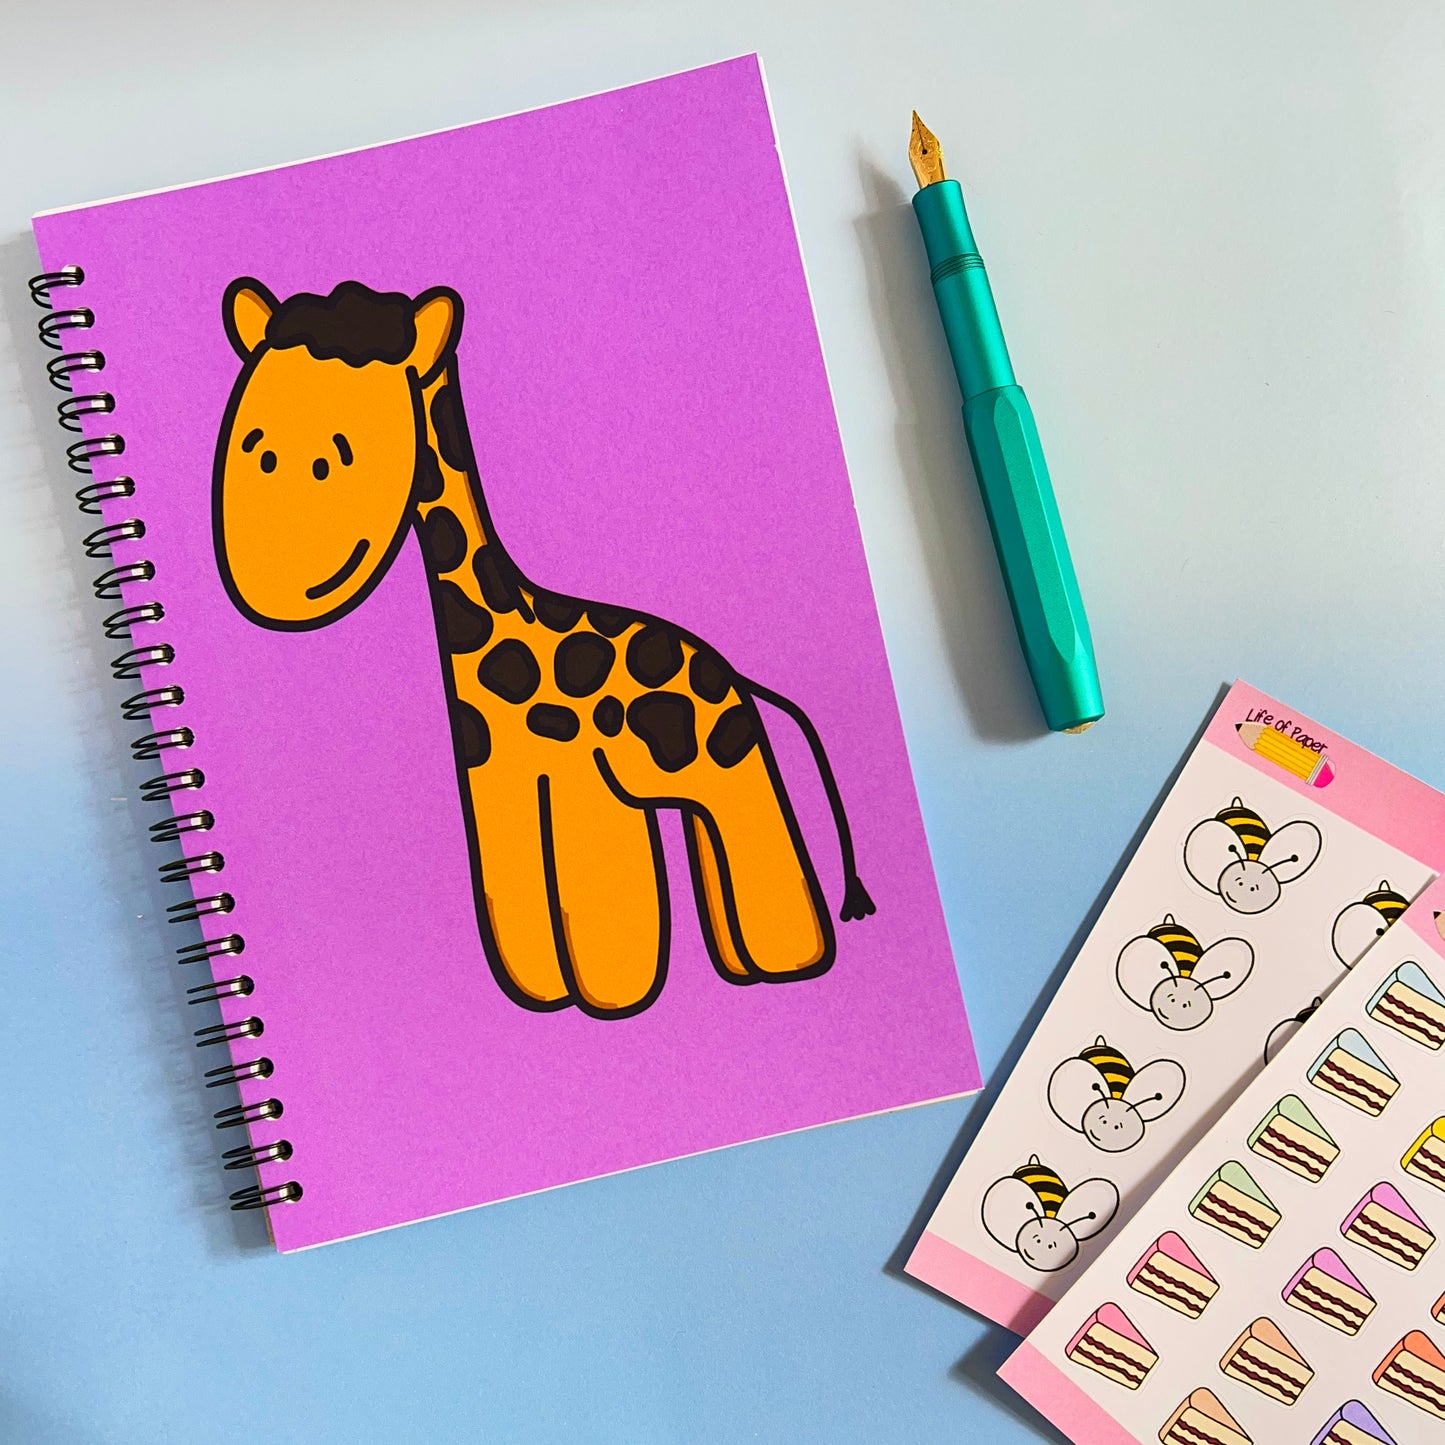 A vibrant workspace featuring a Happy Giraffe Notebook with a soft pink cover, a teal fountain pen, and a sheet of cute stickers with animal faces and cakes against a light blue background. The notebook includes 40 pages, perfect for jotting down your thoughts.